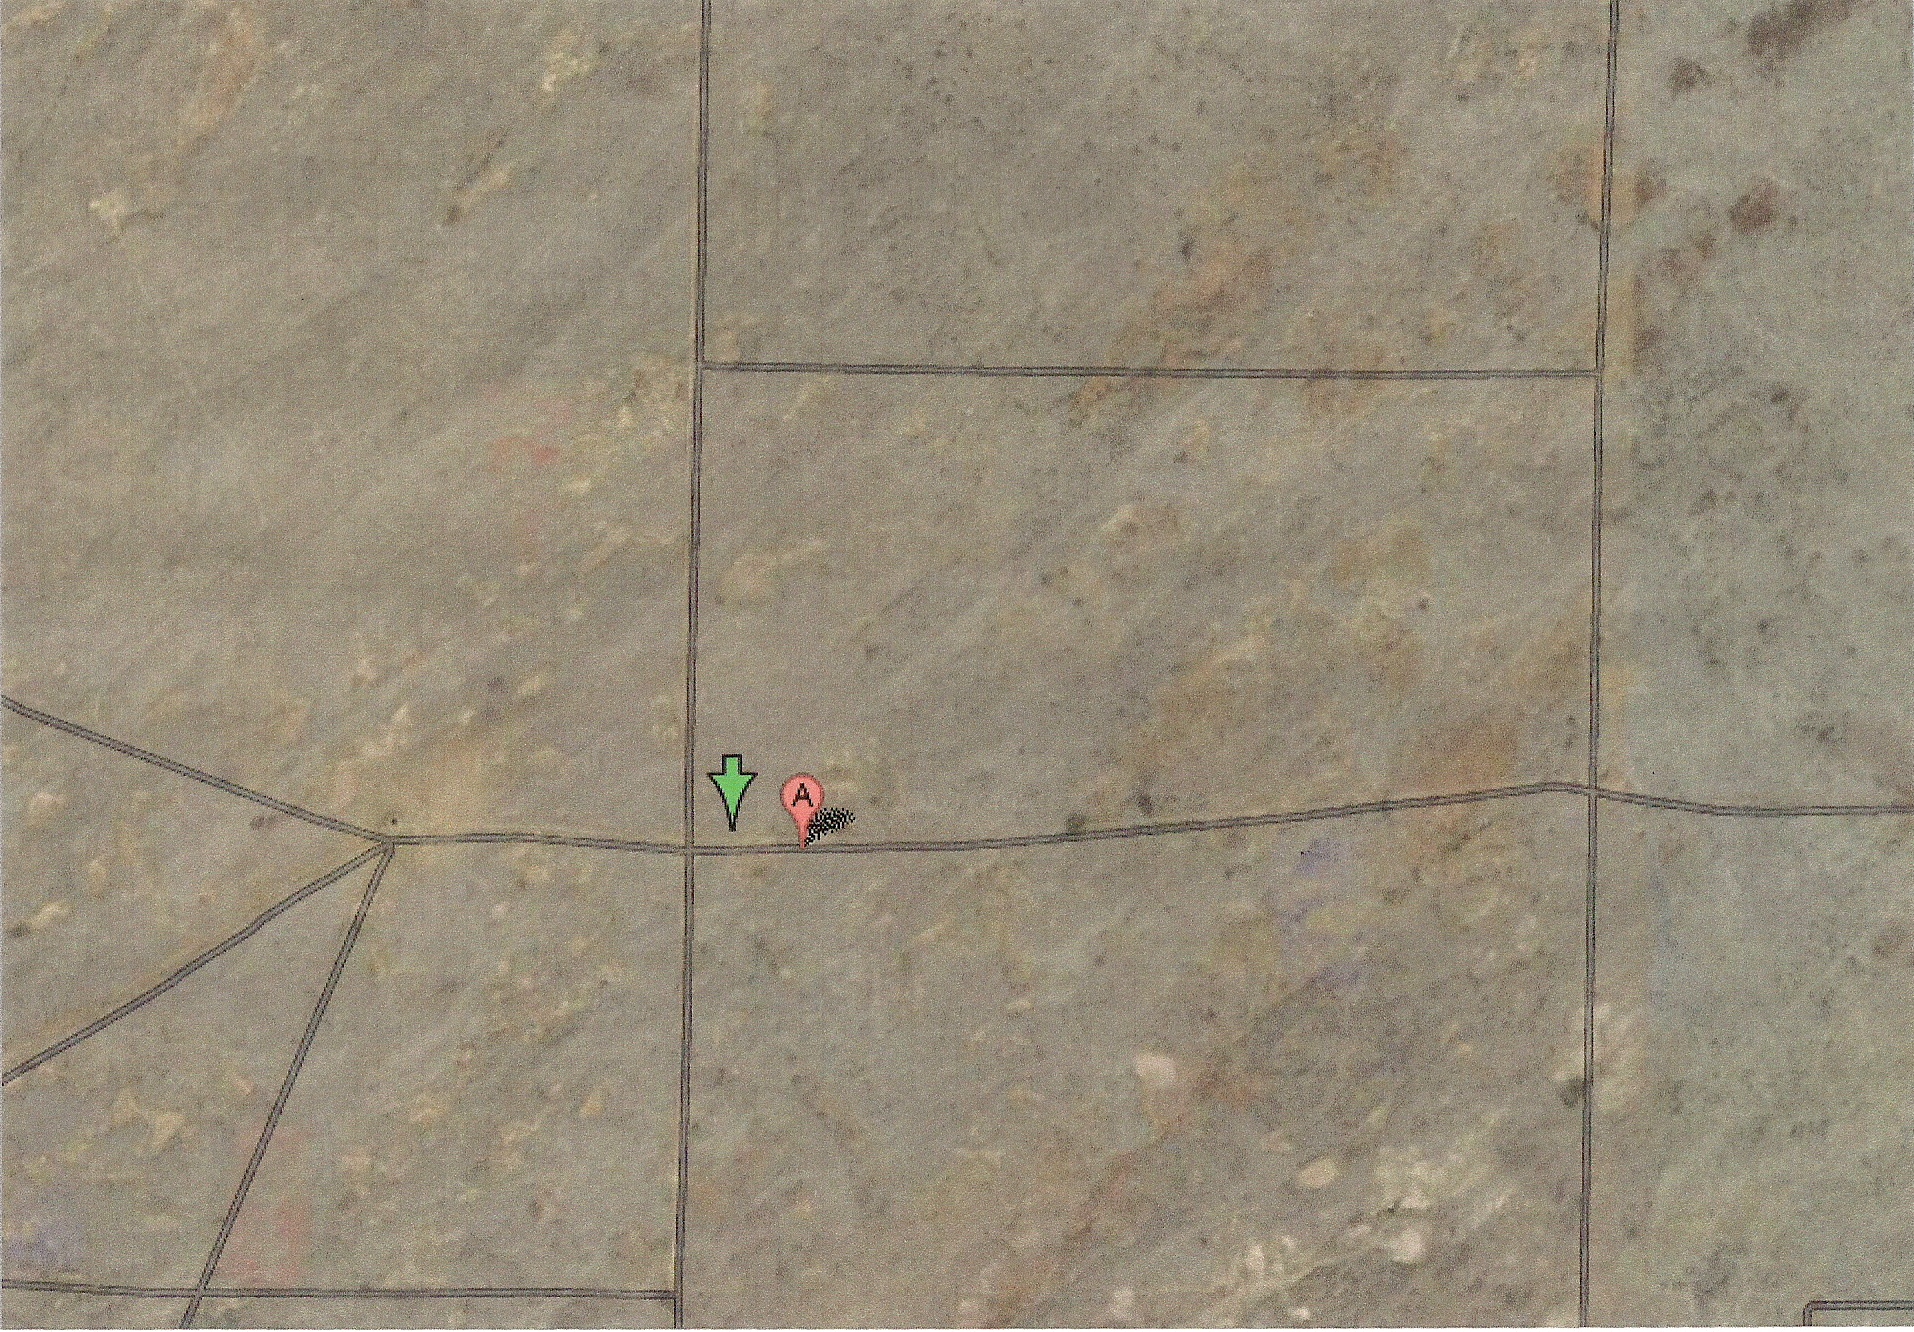 40-Acres-In-Apache-County-Arizona-Aerial-Map0001